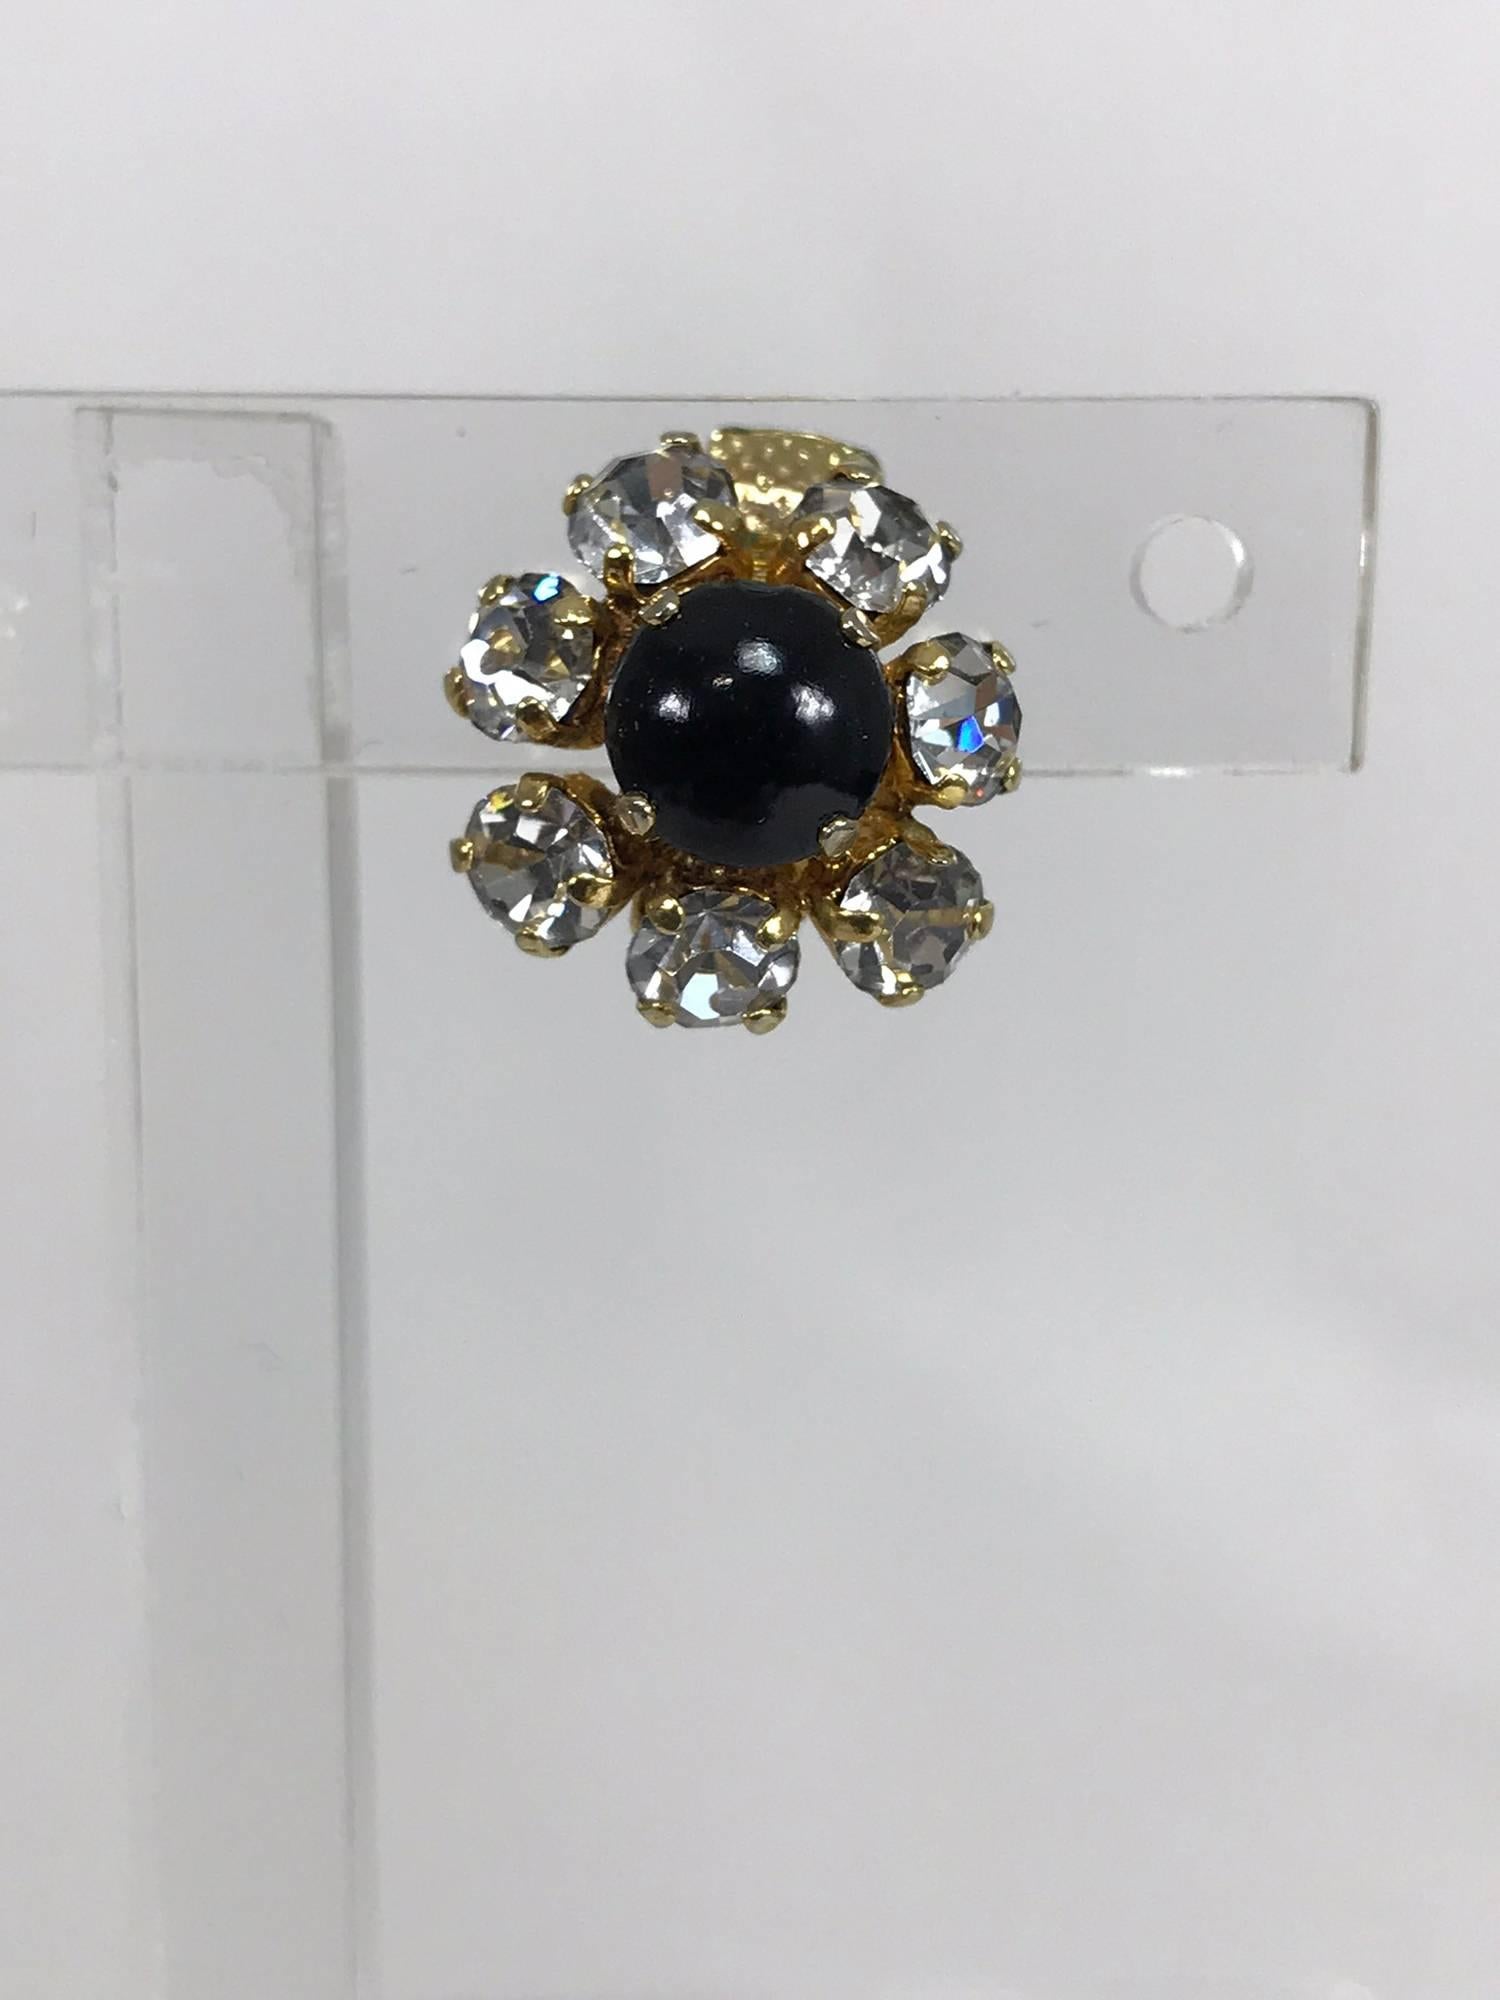 Christian Dior dainty gold earrings set with a black ball center that is surrounded with prong set rhinestones, clip backs. Marked Christian Dior Germany 1965.
Approximately 5/8